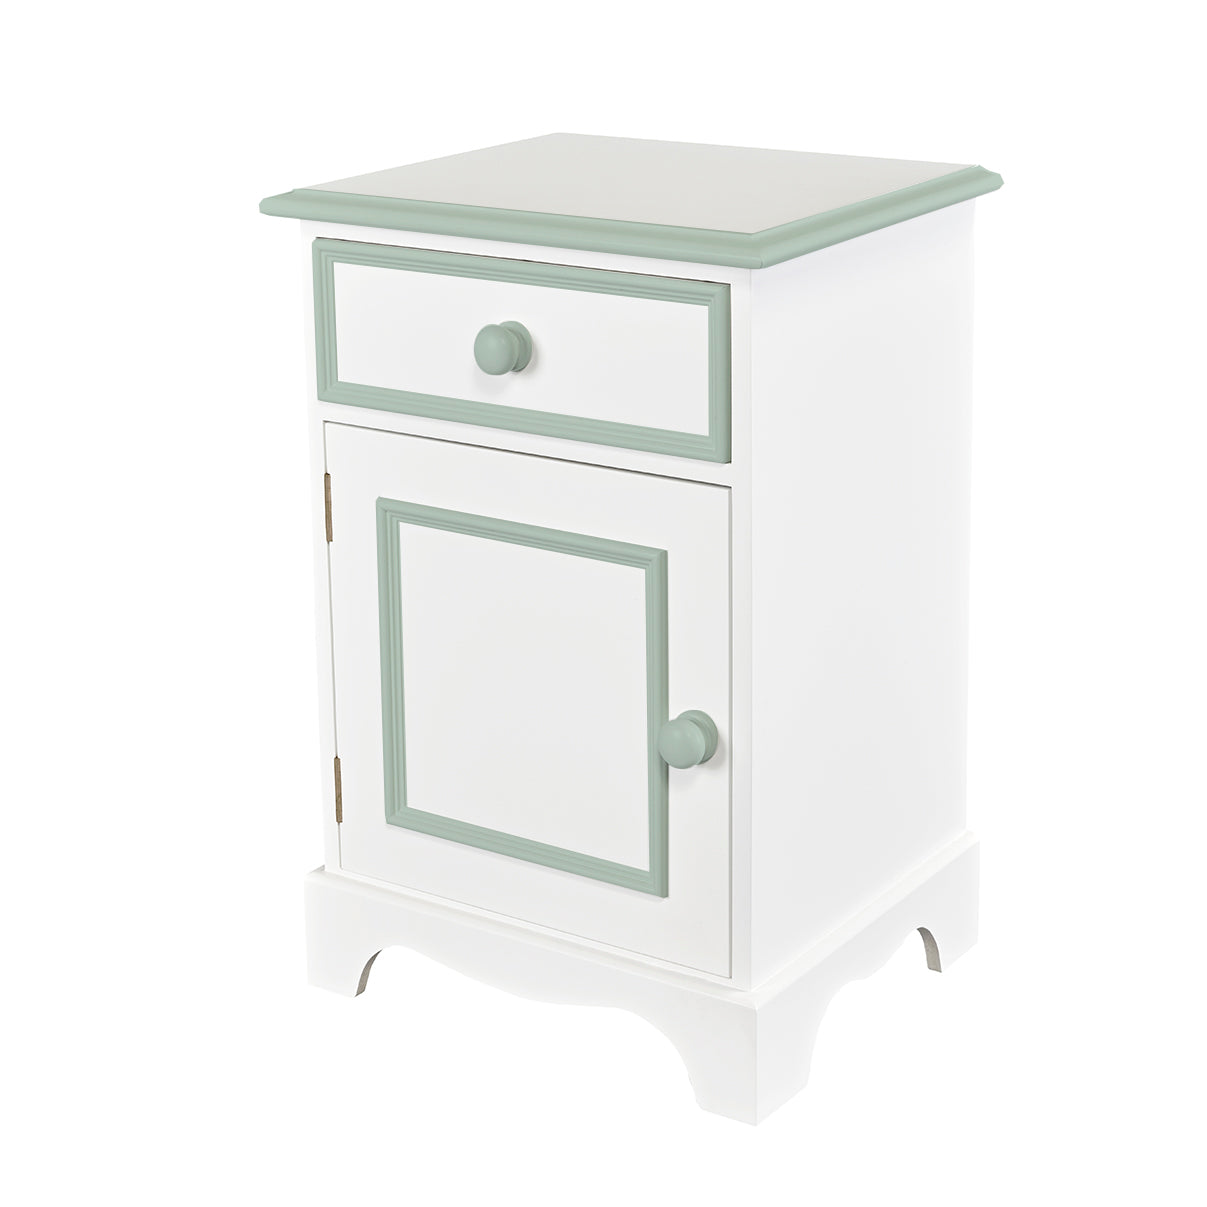 White and green bedside cupboard for kids room & nursery | Dragons of Walton Street